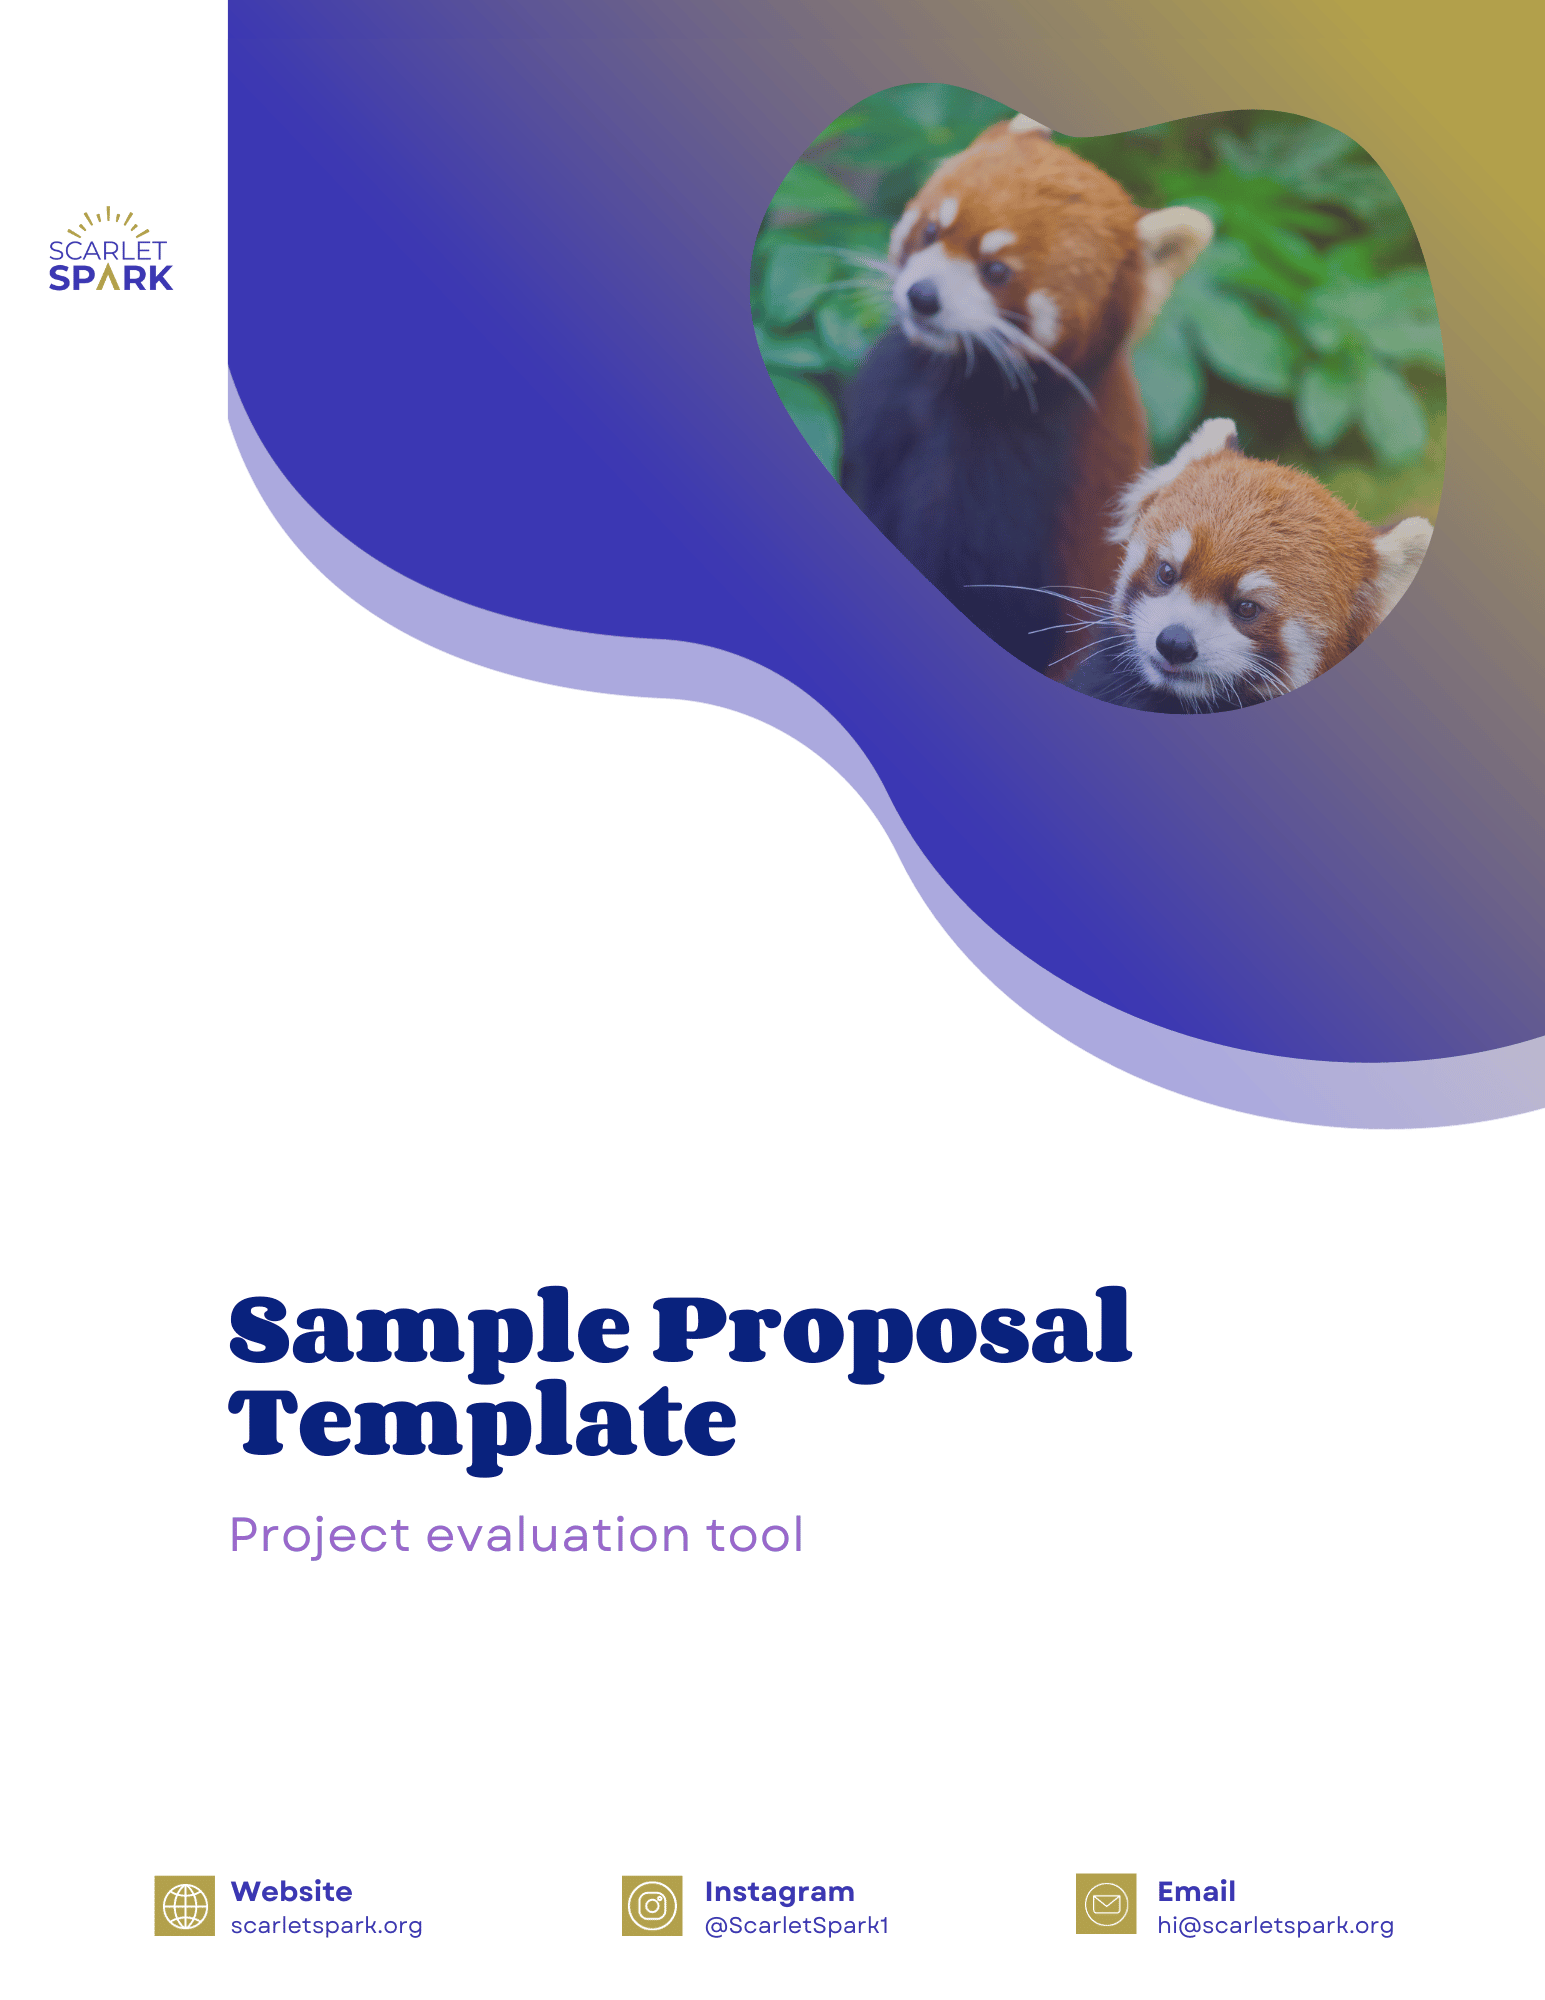 Sample Proposal Template Cover Image